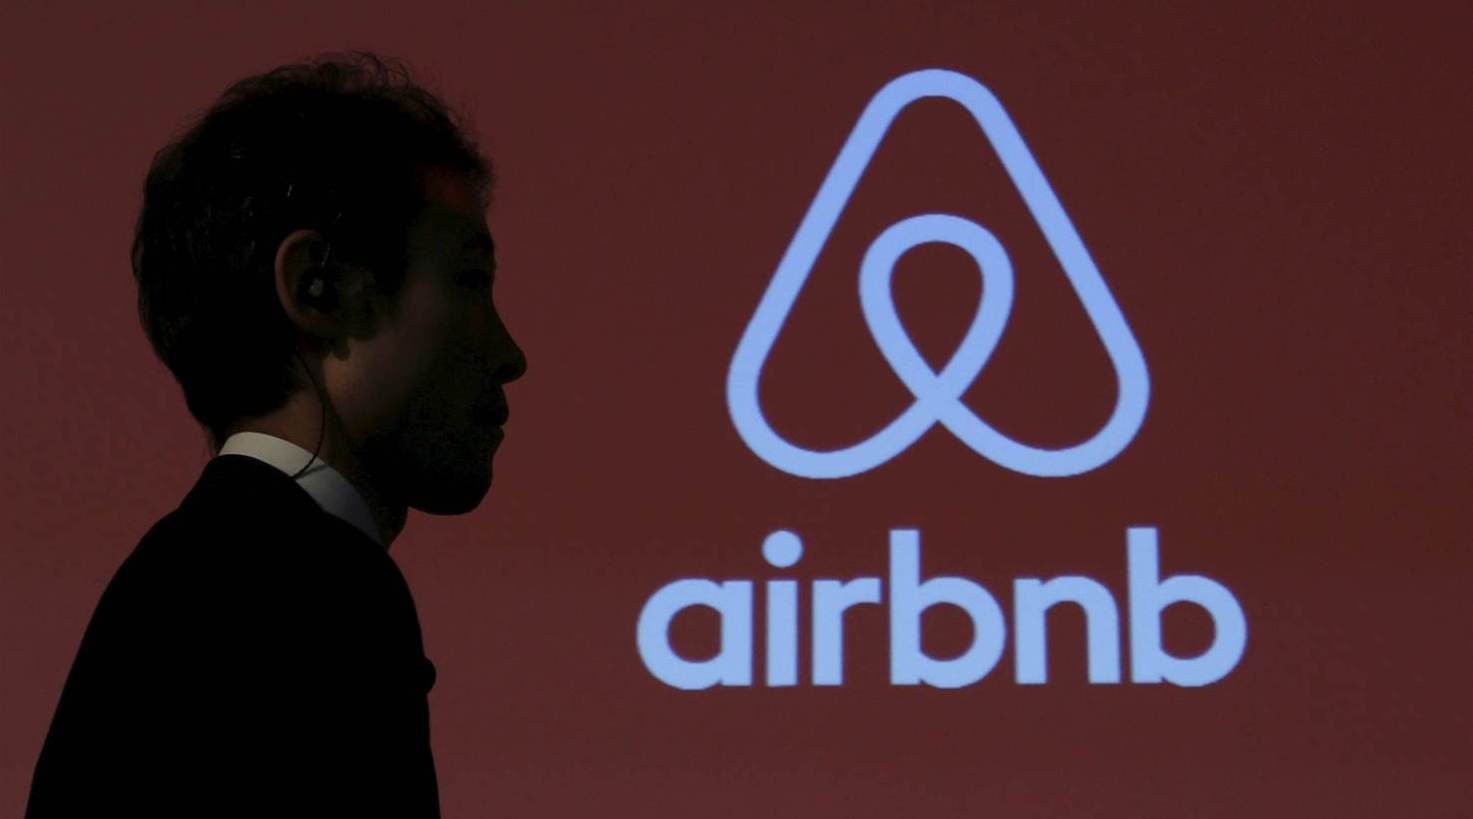 Home rental firm Airbnb aims to raise roughly $3b in IPO